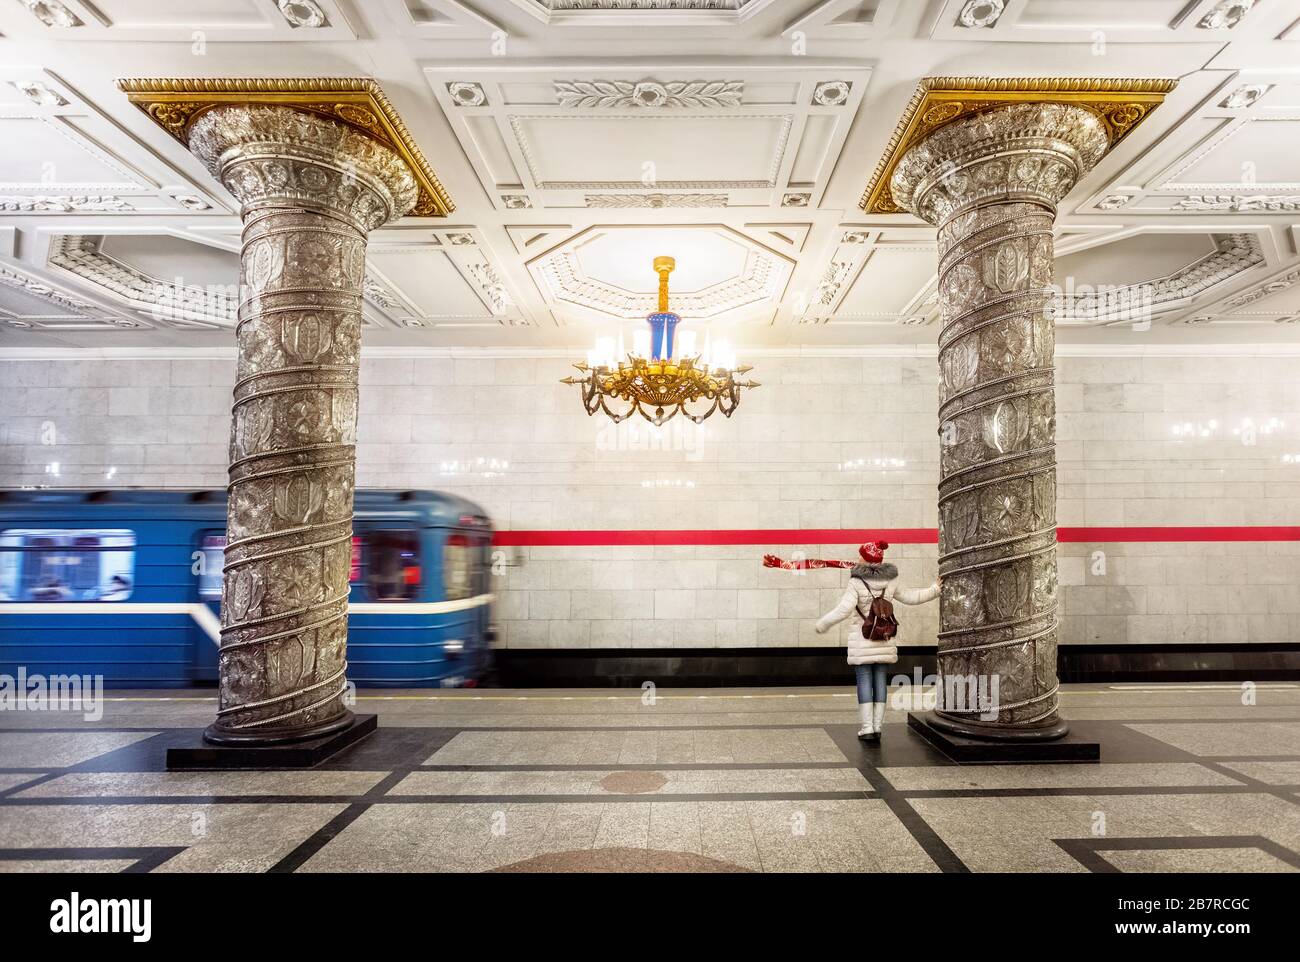 Saint Petersburg, Russia – December 30, 2016. Tourist woman late her train at Avtovo station with Crystal column at the underground metro station in S Stock Photo